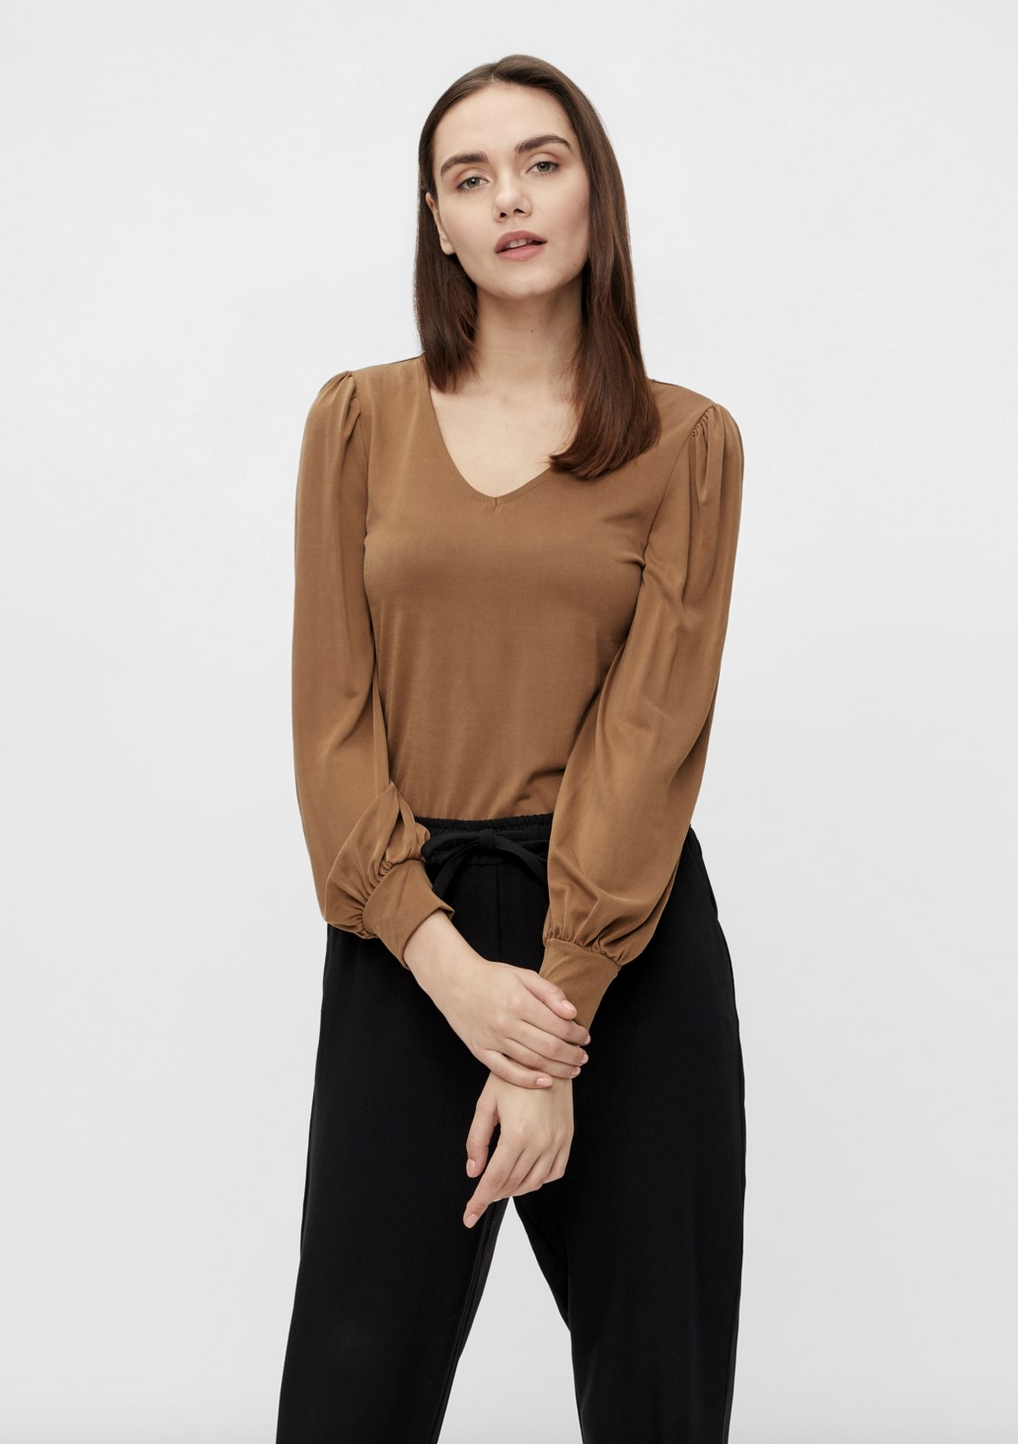 OBJECT OBJECT - Shirt Annie sepia met v-hals